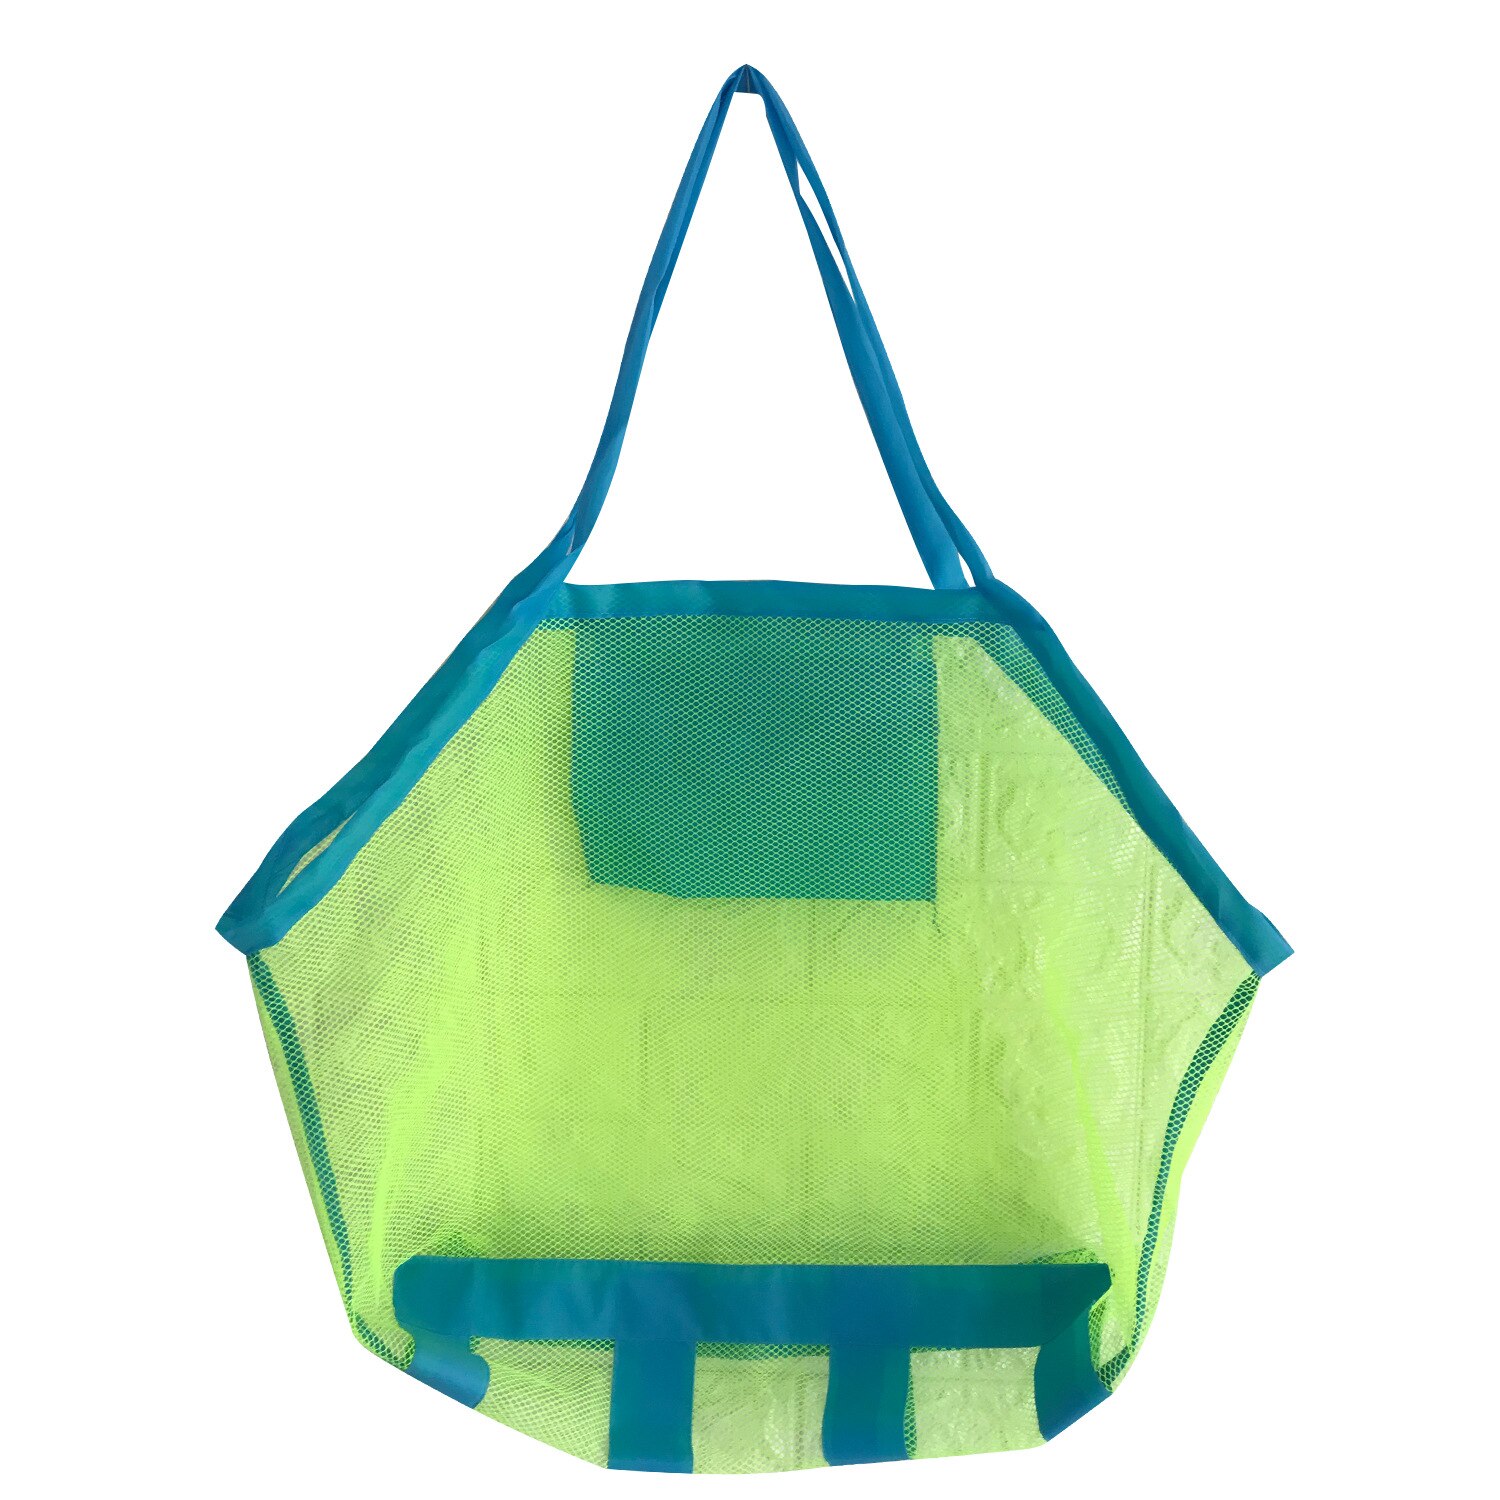 1Pcs Beach Bag Mesh Stay Away From Sand Durable Indoor Outdoor Portable Hand Bag Swimming Sport Toys Storage For Children Kids: Green net